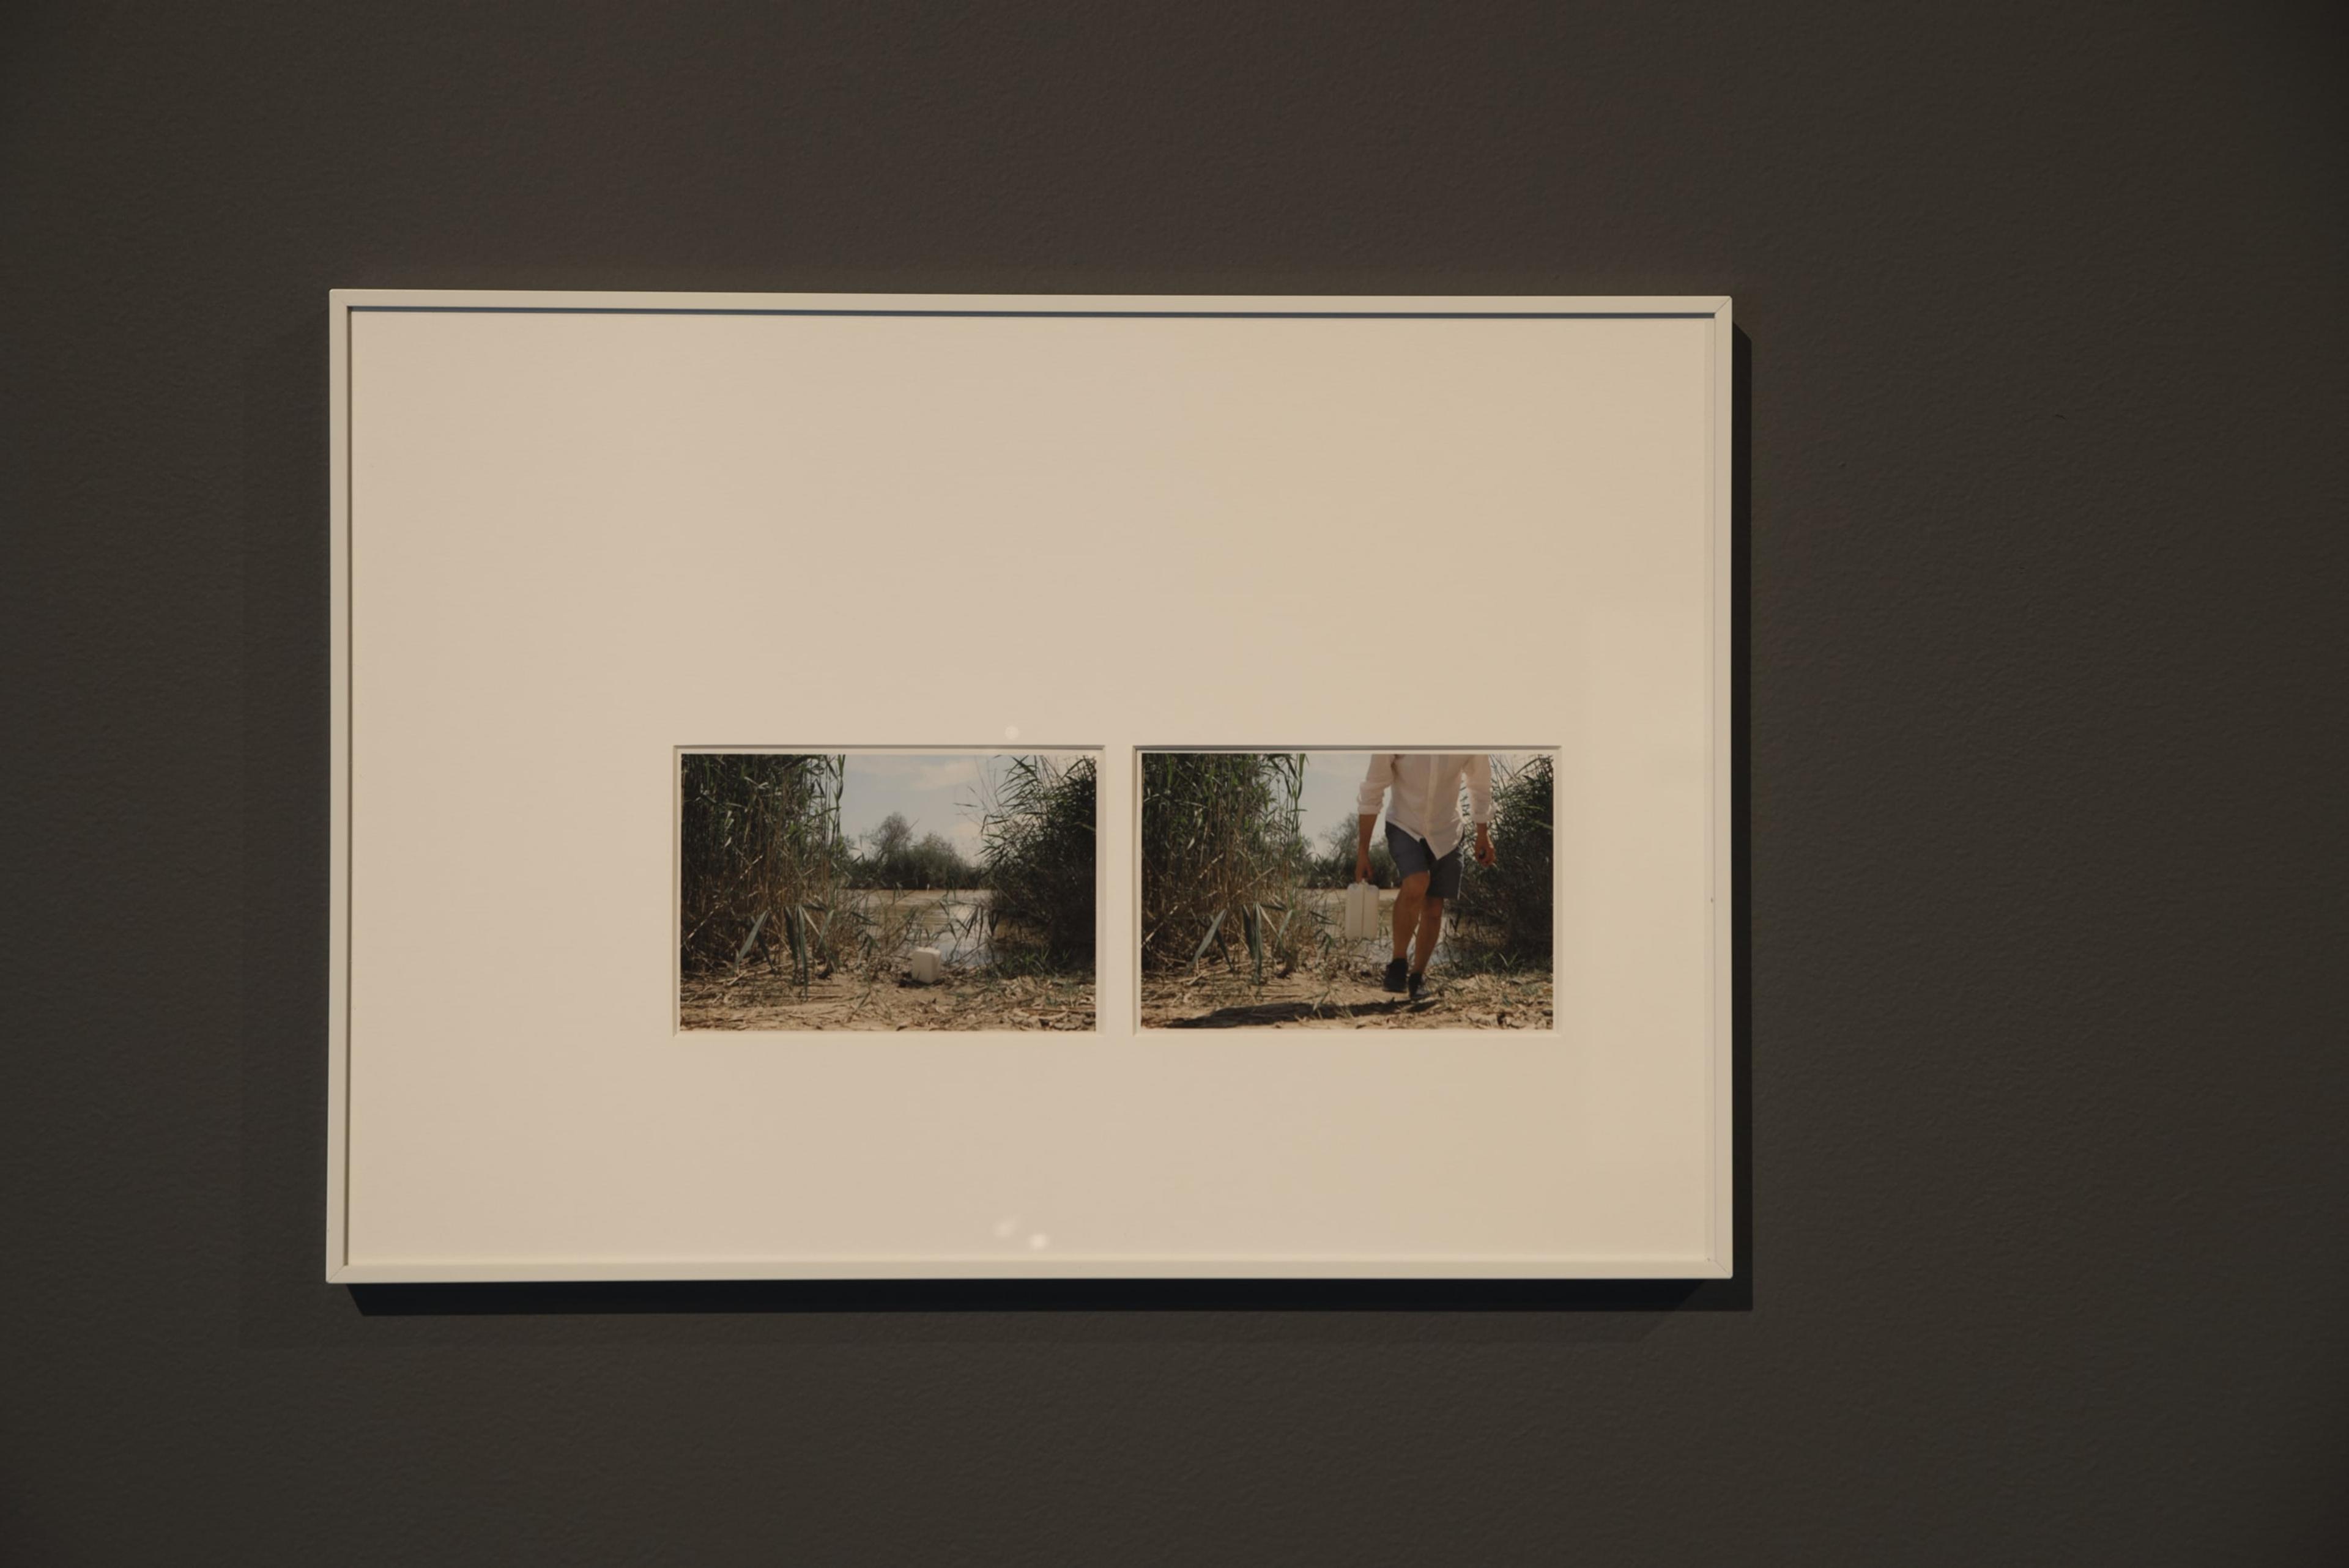 Installation view of Dane Mitchell, Meander Collection, 2015, c-print, framed, Victoria University of Wellington Art Collection, purchased 2018, in the exhibition Solid State: Works from the Victoria University of Wellington Art Collection, 6 October – 20 December 2018, Adam Art Gallery Te Pātaka Toi.